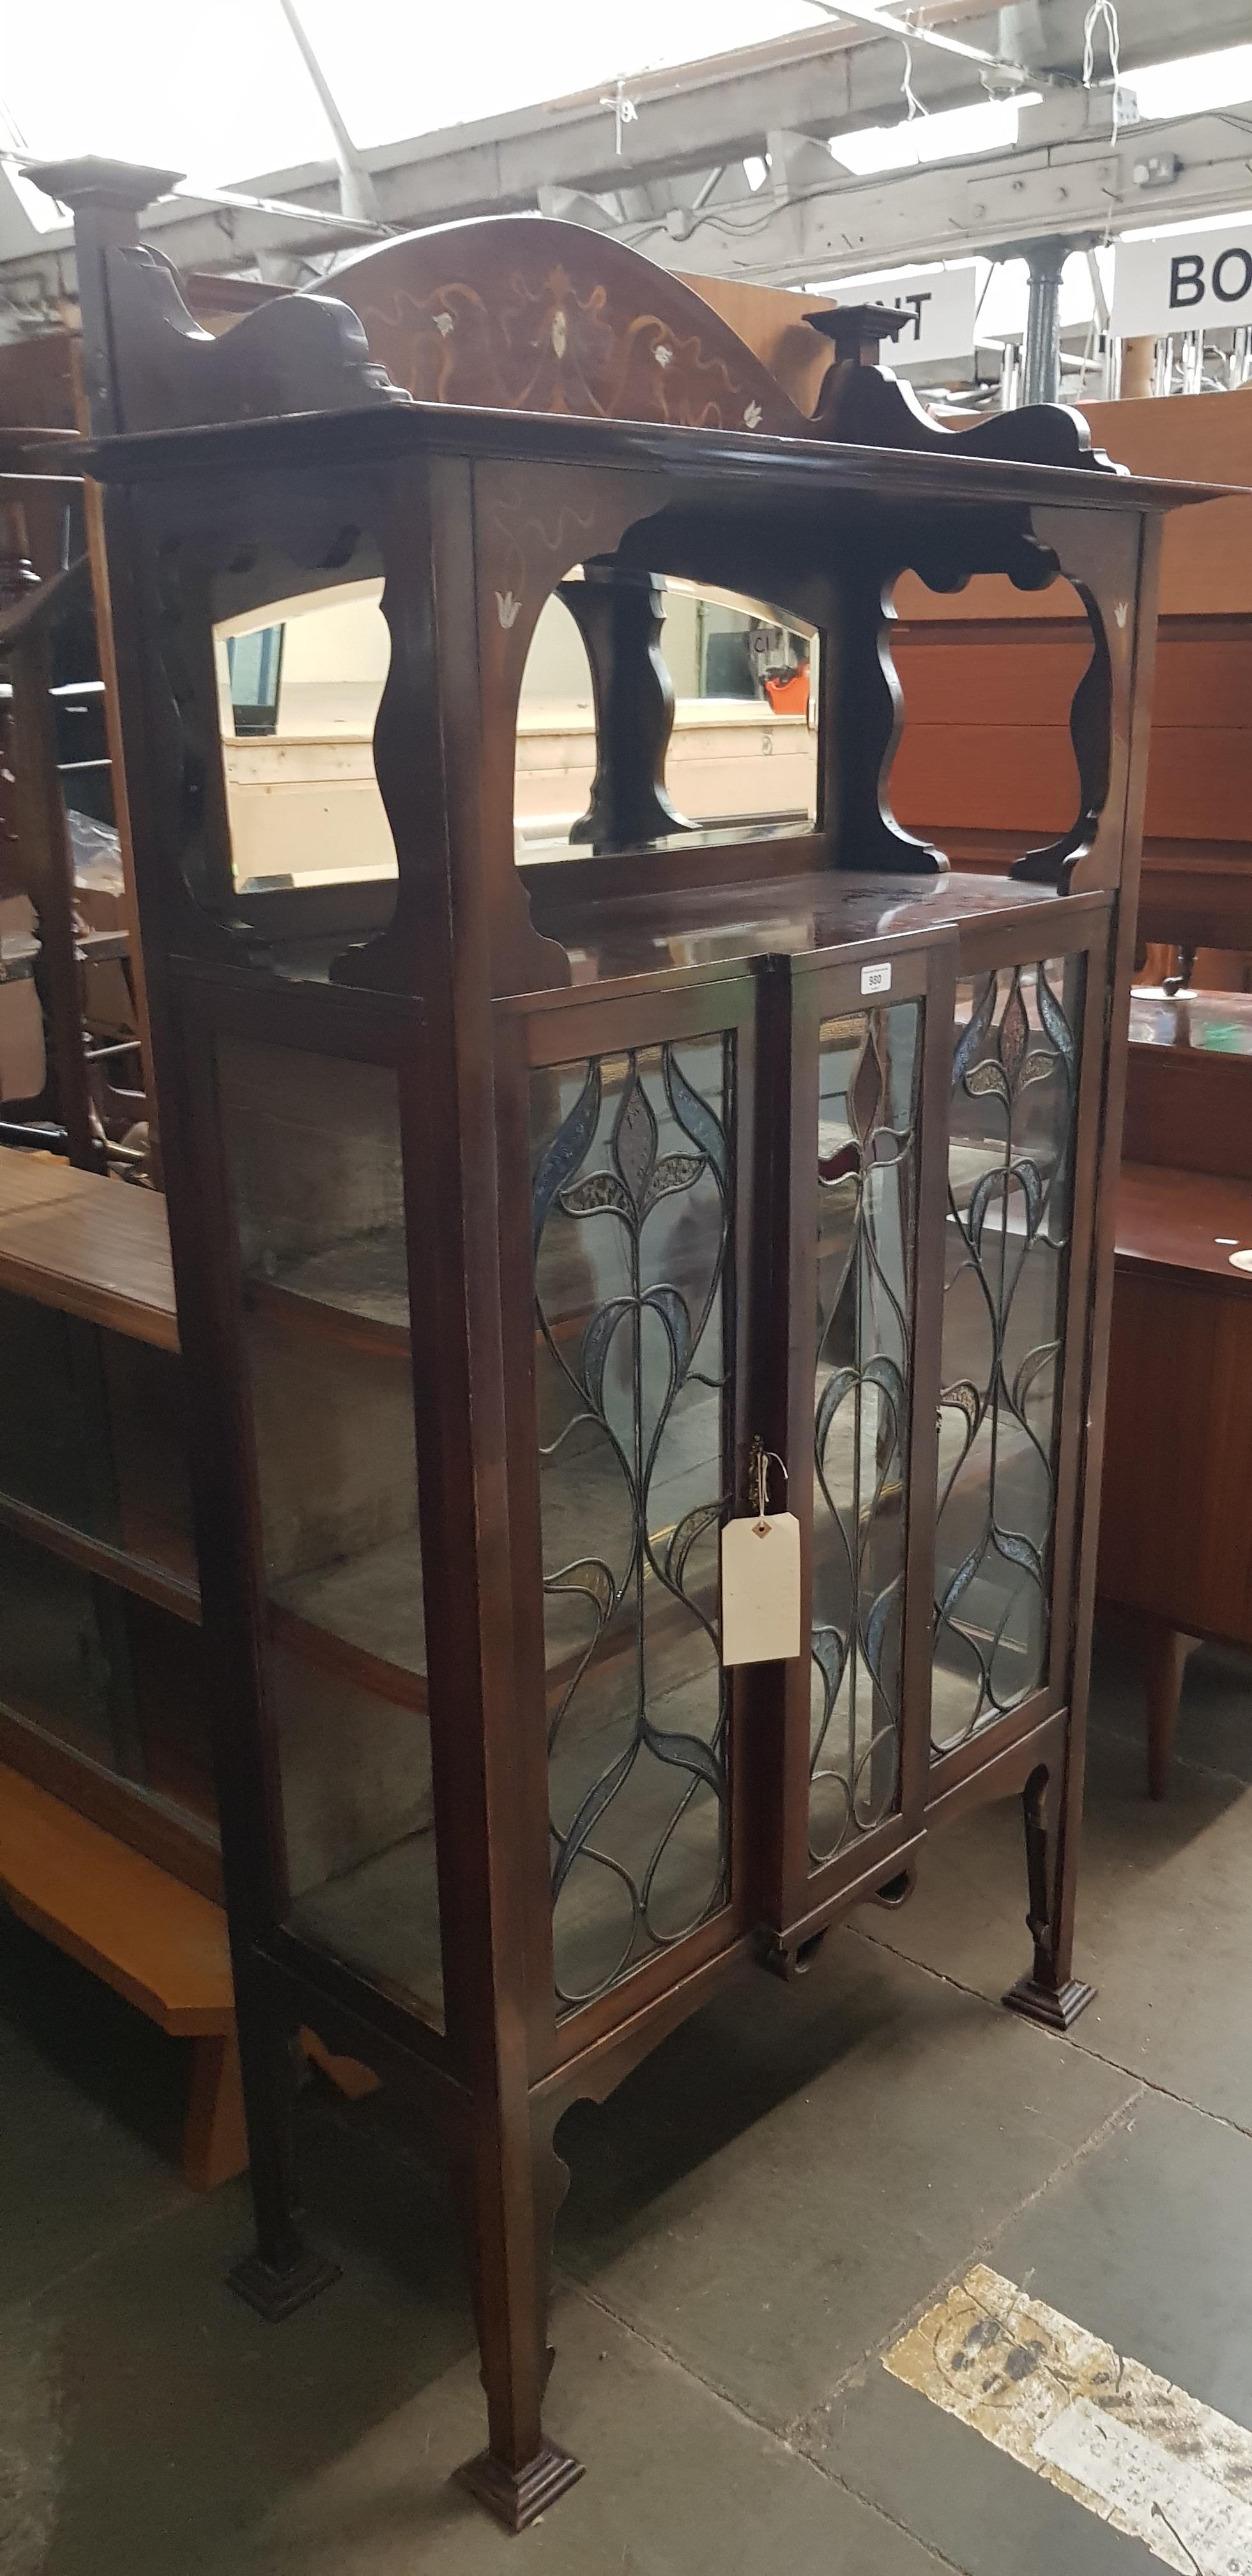 An Edwardian Arts & Crafts inlaid mahogany display cabinet with leaded glass panels to the doors.